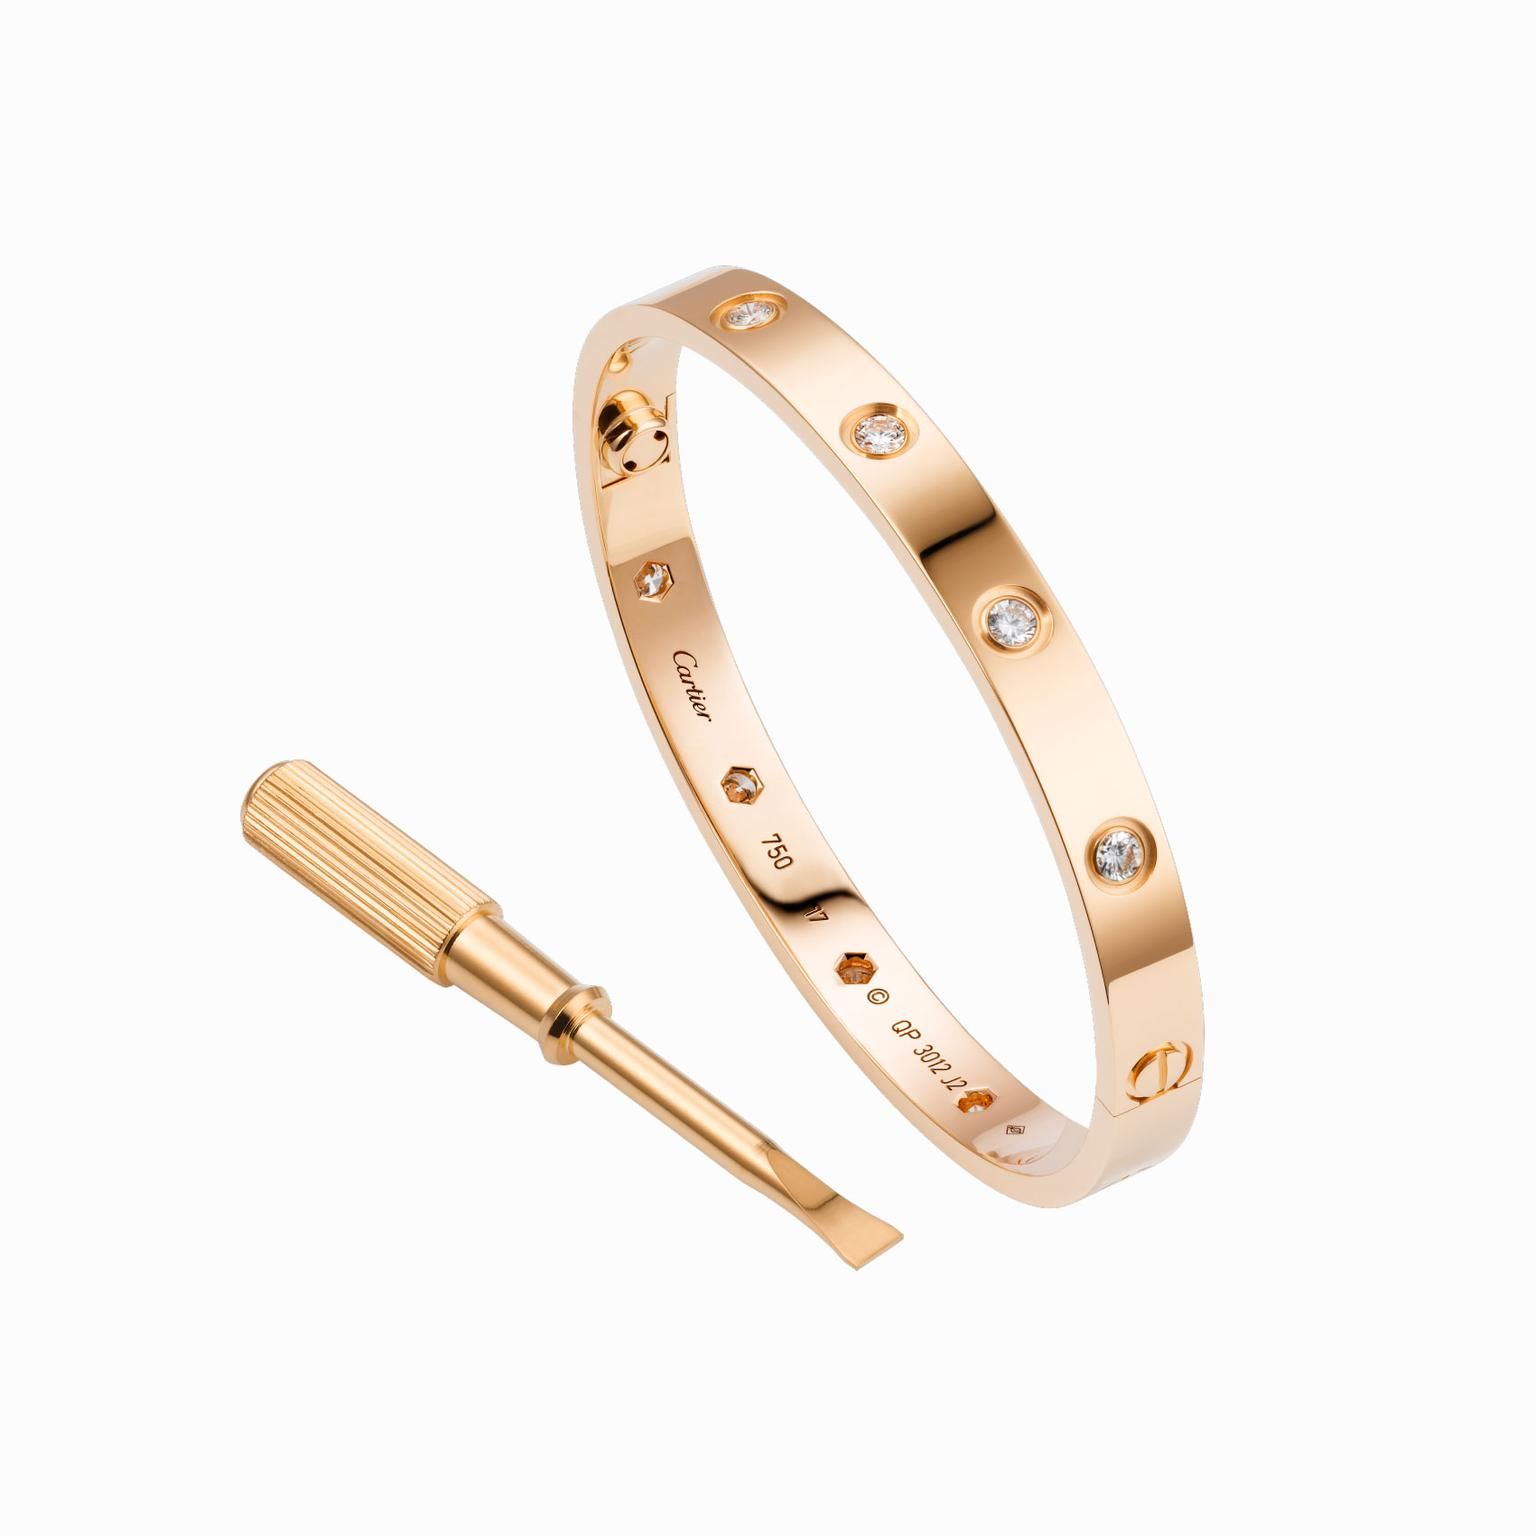 how much does the cartier nail bracelet cost